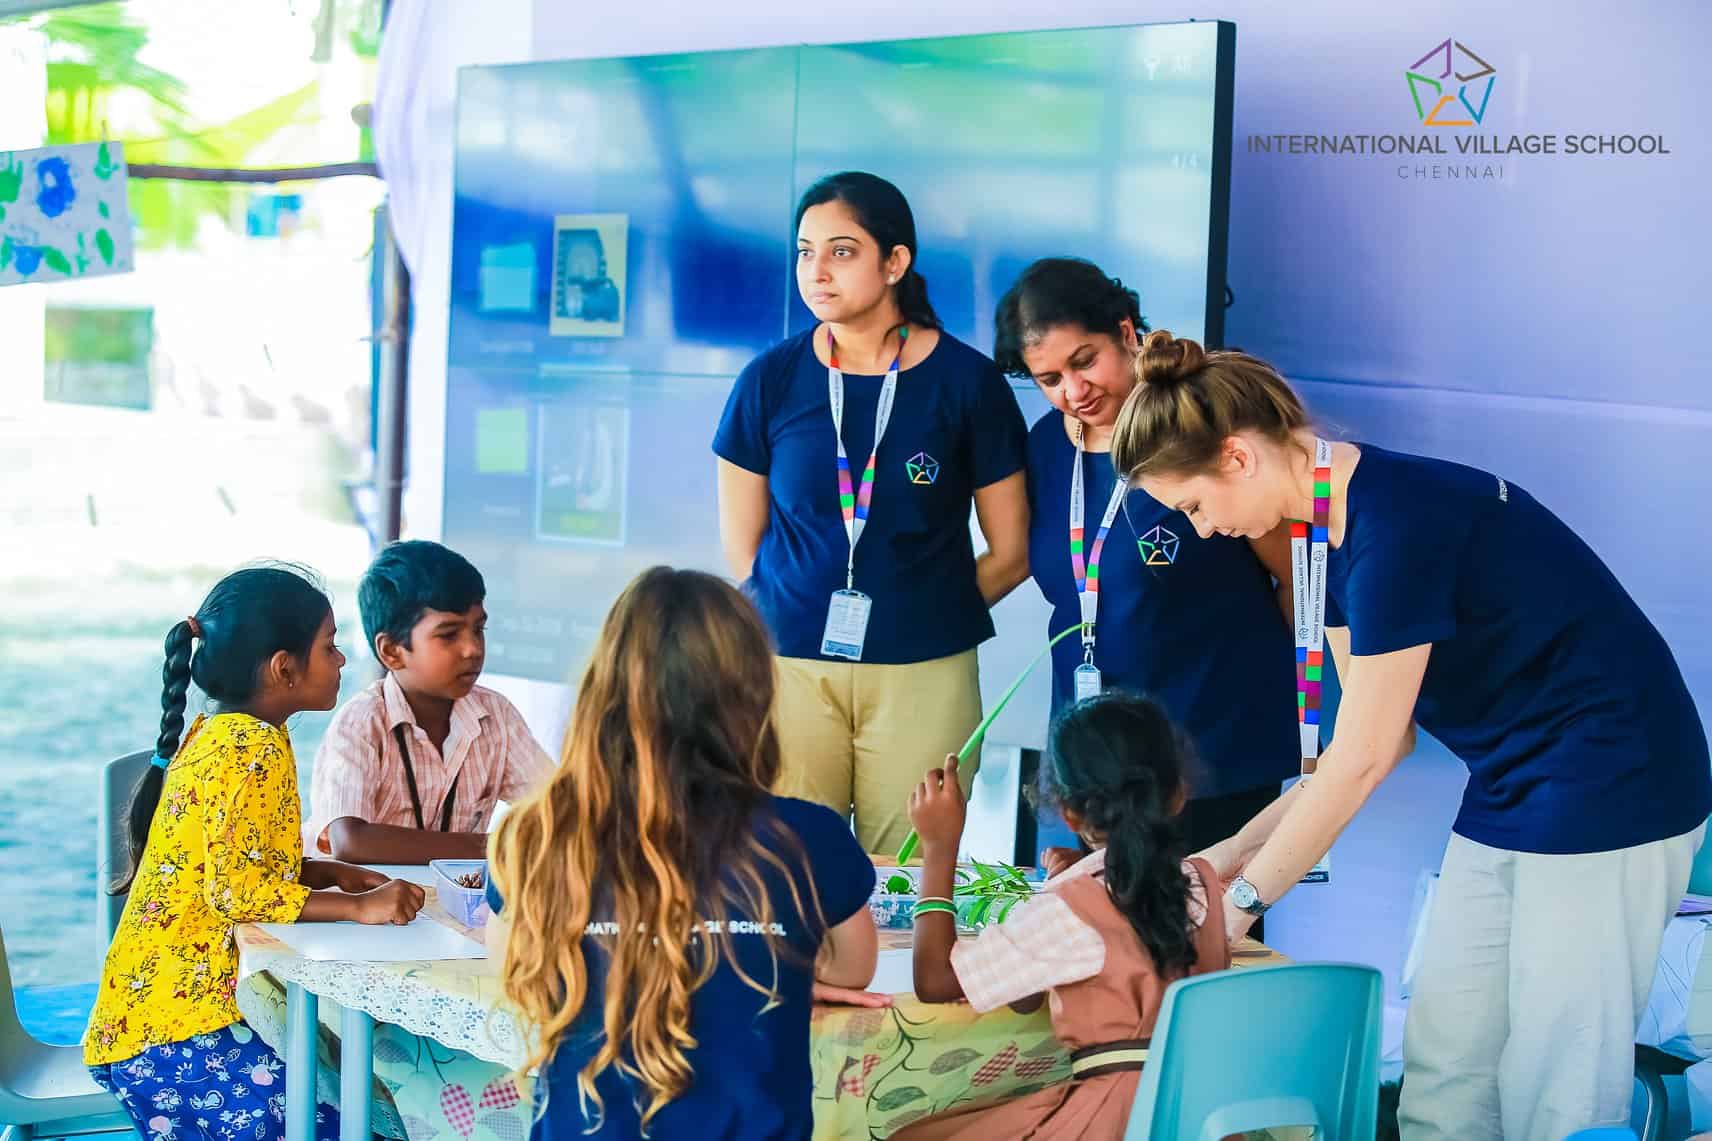 Three students sitting around a table with one girl holding a plant and three IVS teachers standing and guiding them. One IVS teacher sitting with the students.